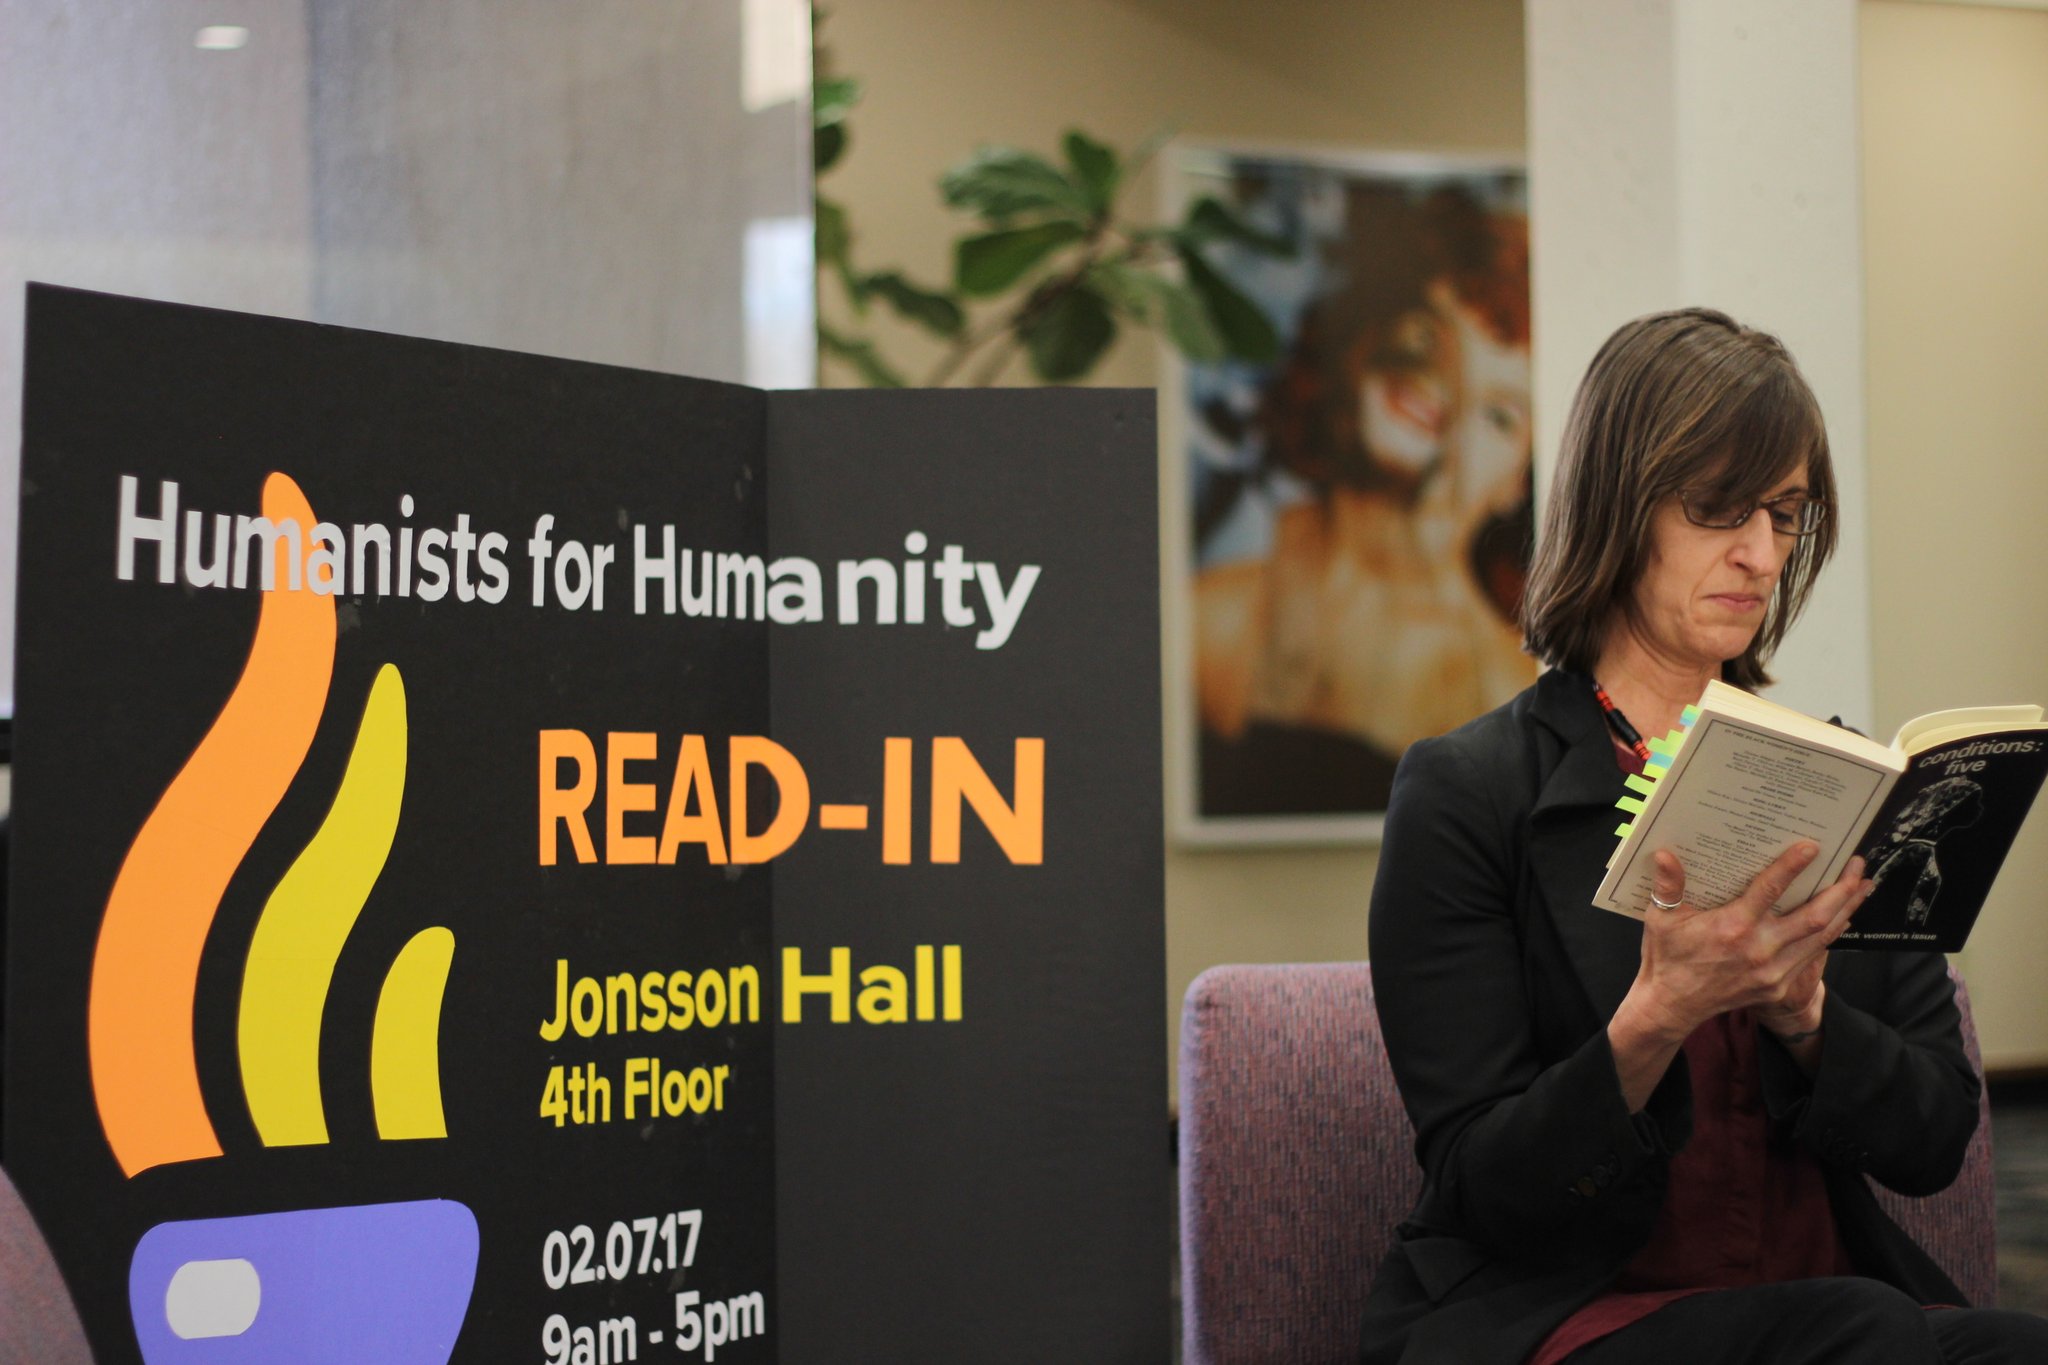 ‘Humanists for Humanity Read-In’ promotes inclusivity on campus